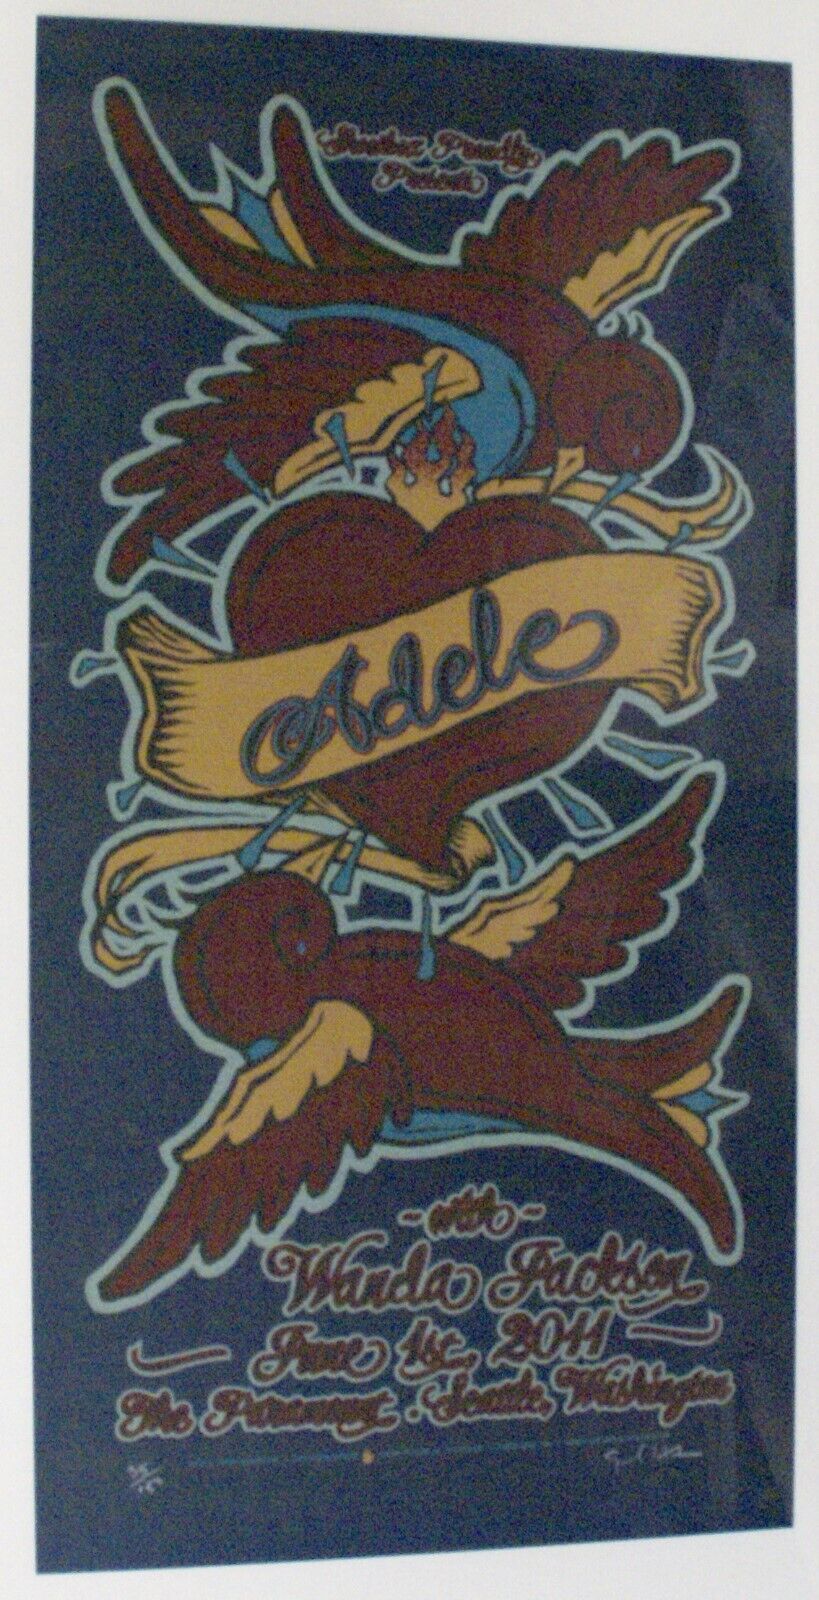 Adele Poster Ltd Edition Art 35/150 Signed by Gary Houston Seattle 2011